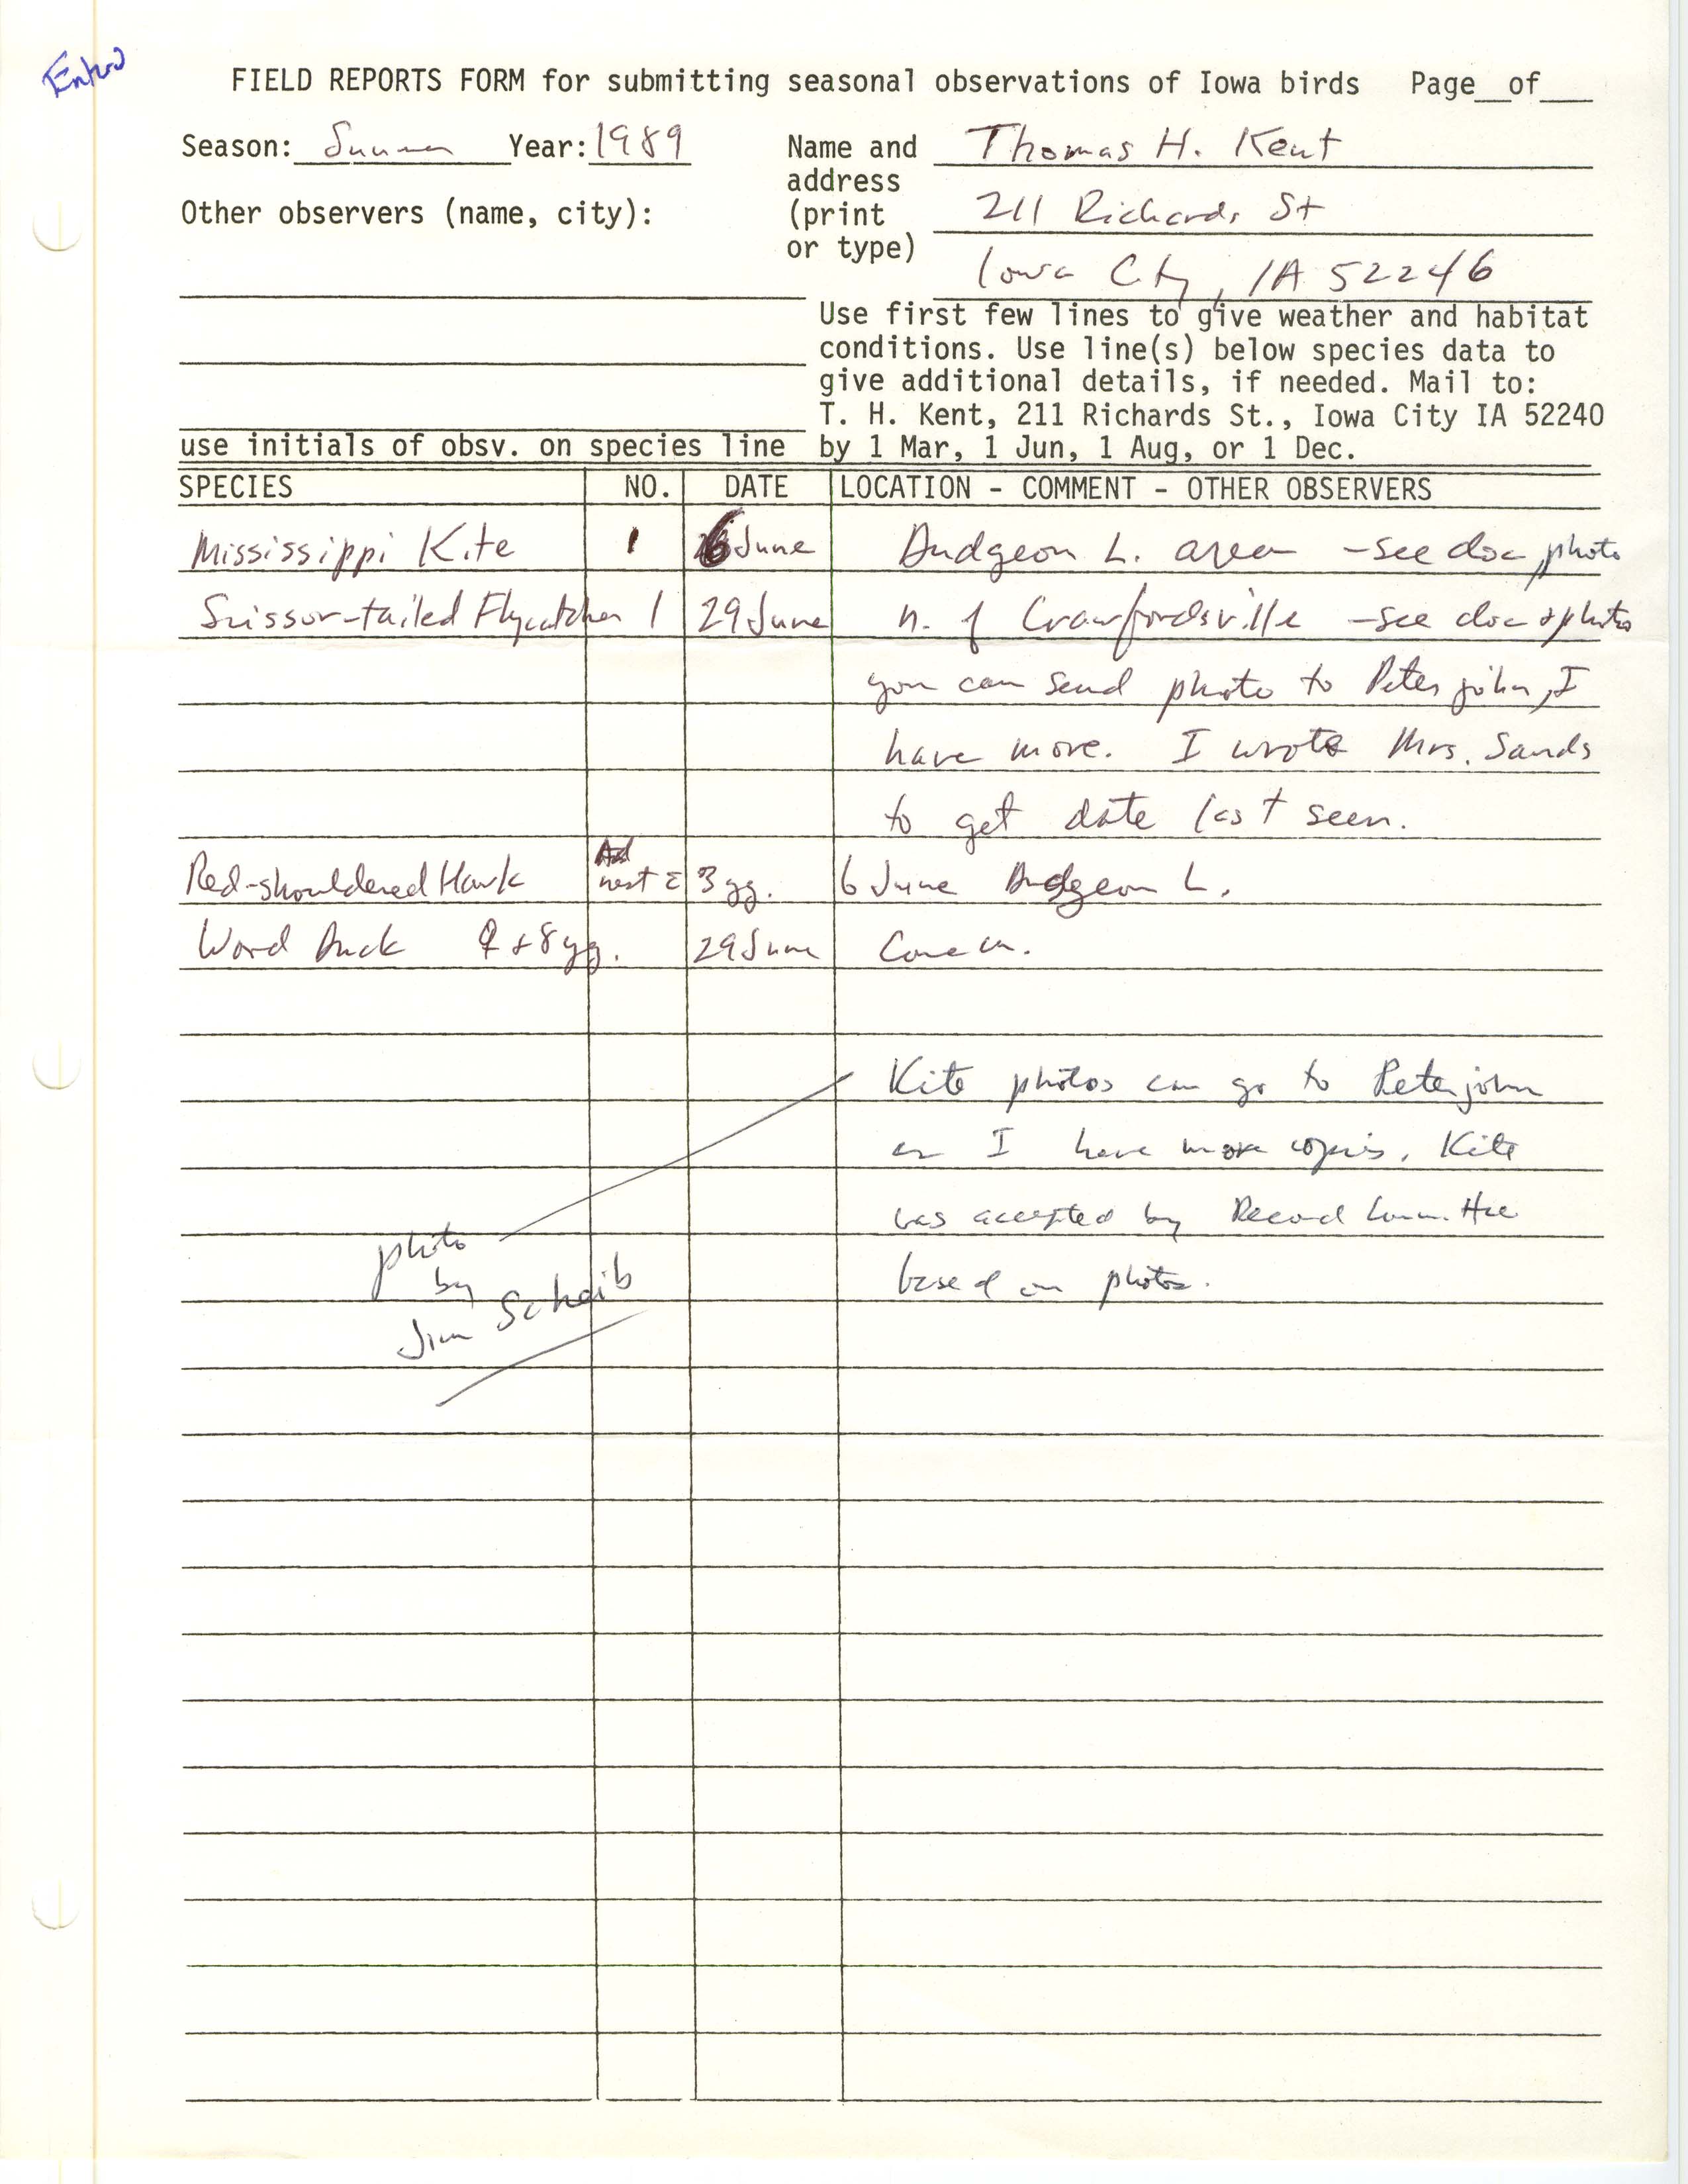 Field reports form for submitting seasonal observations of Iowa birds, Thomas H. Kent, summer 1989